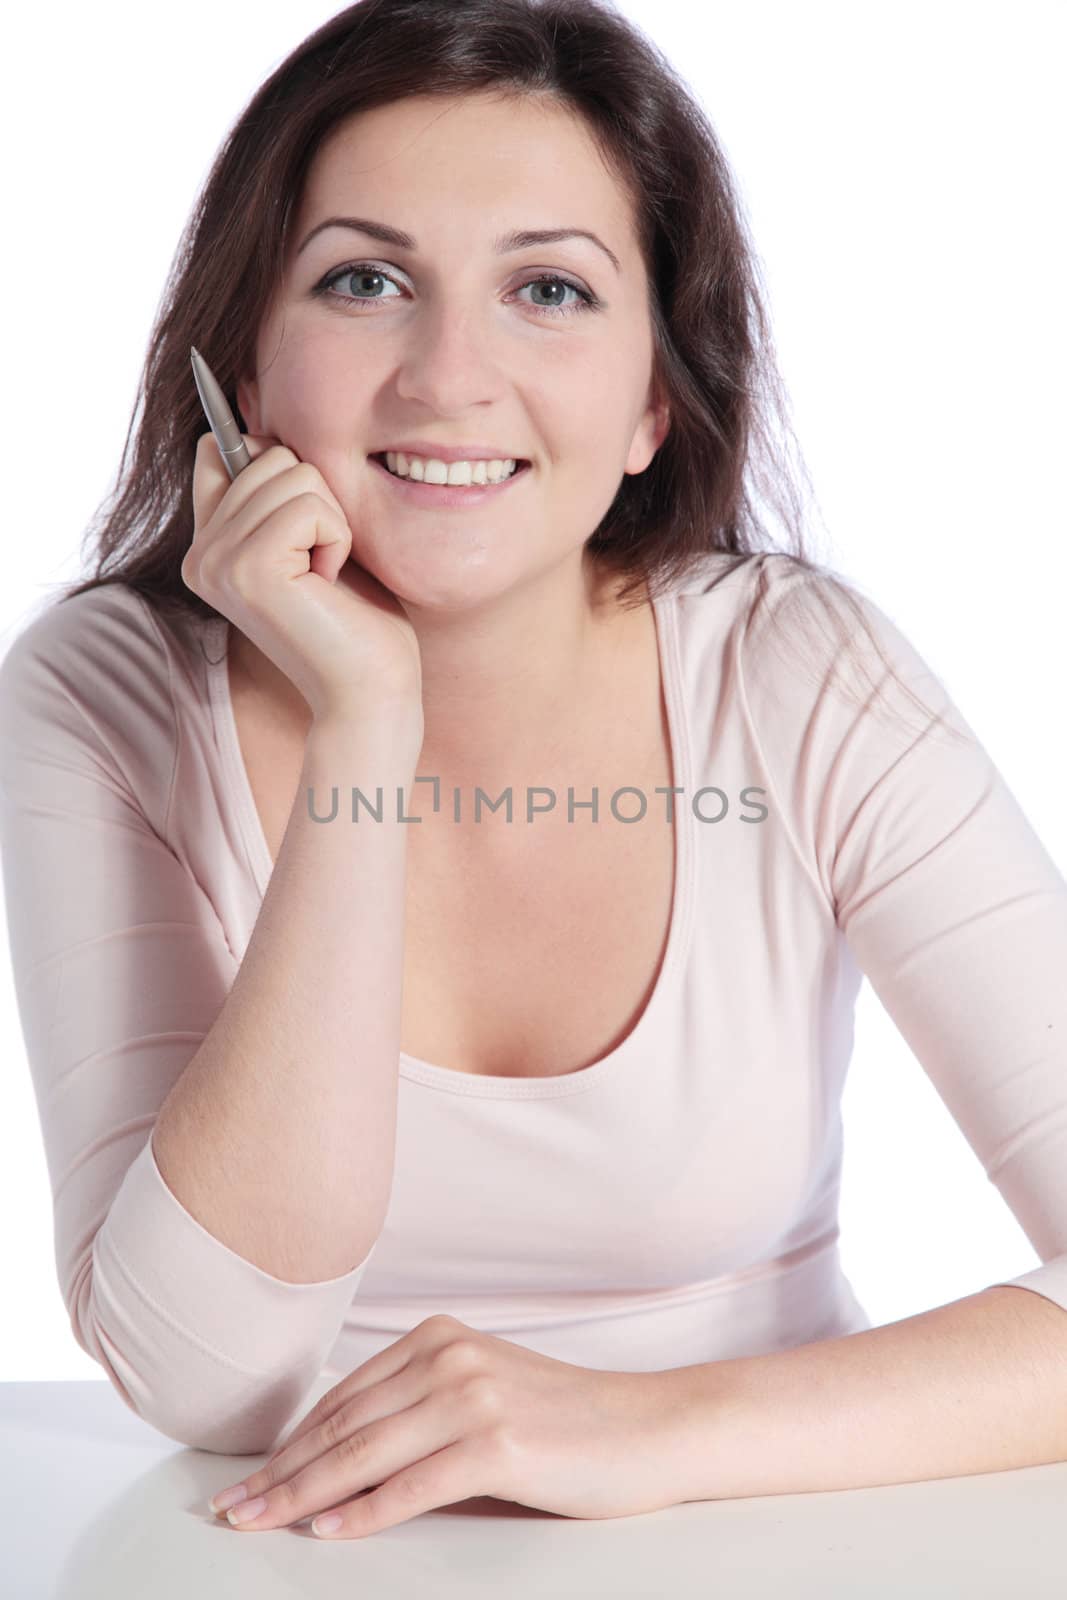 Attractive young woman sitting at a desk. All isolated on white background.